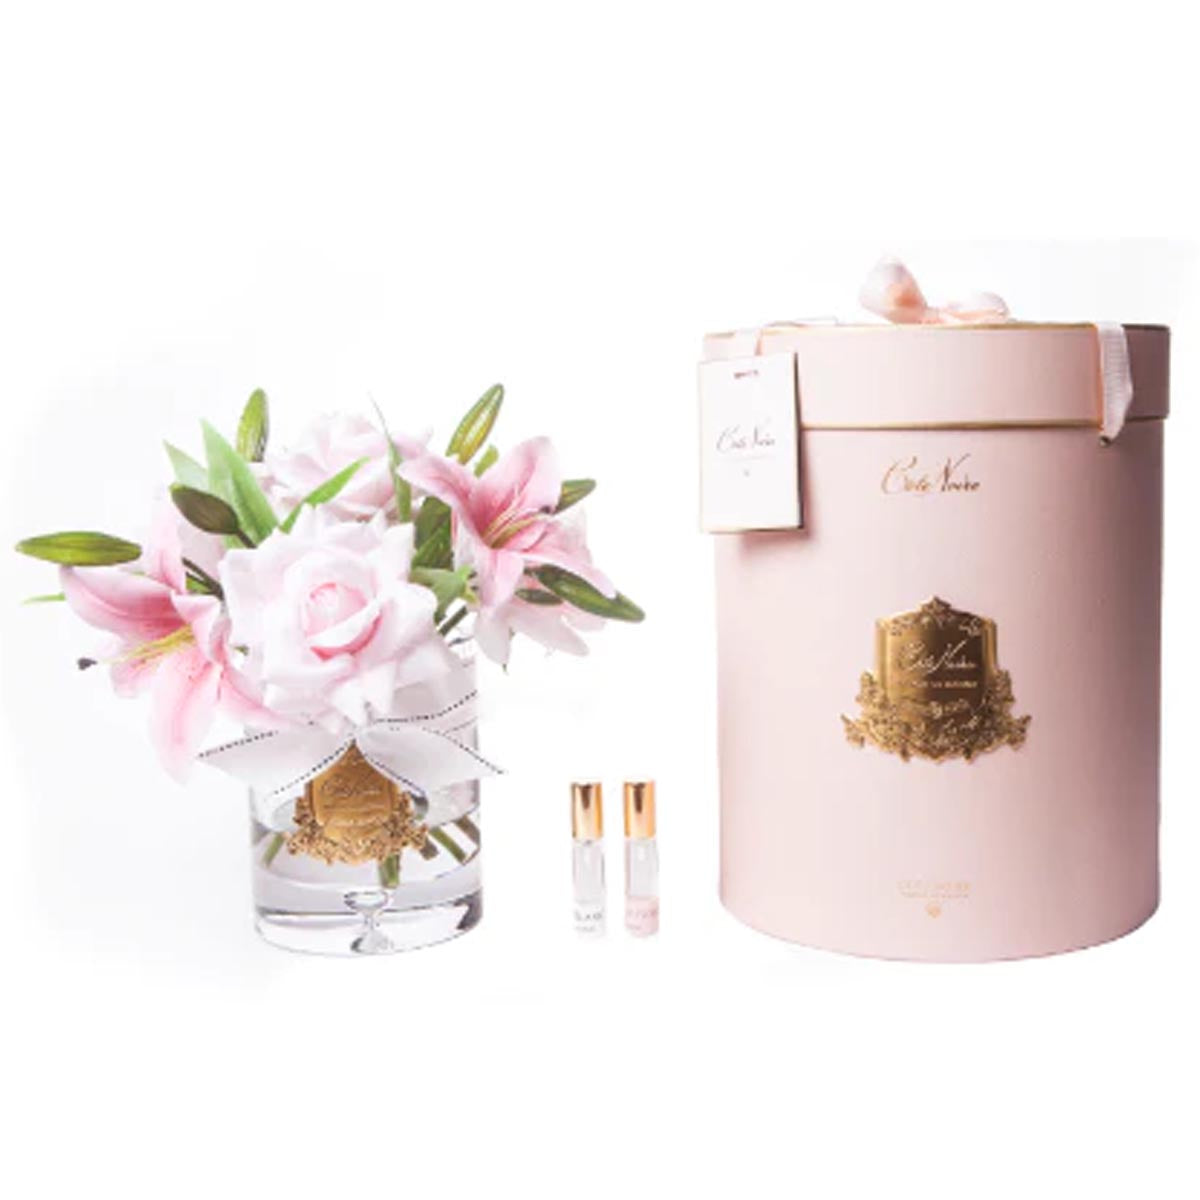 COTE NOIR LUXURY LILIES &amp; ROSES - PINK - GOLD BADGE - PINK BOX 